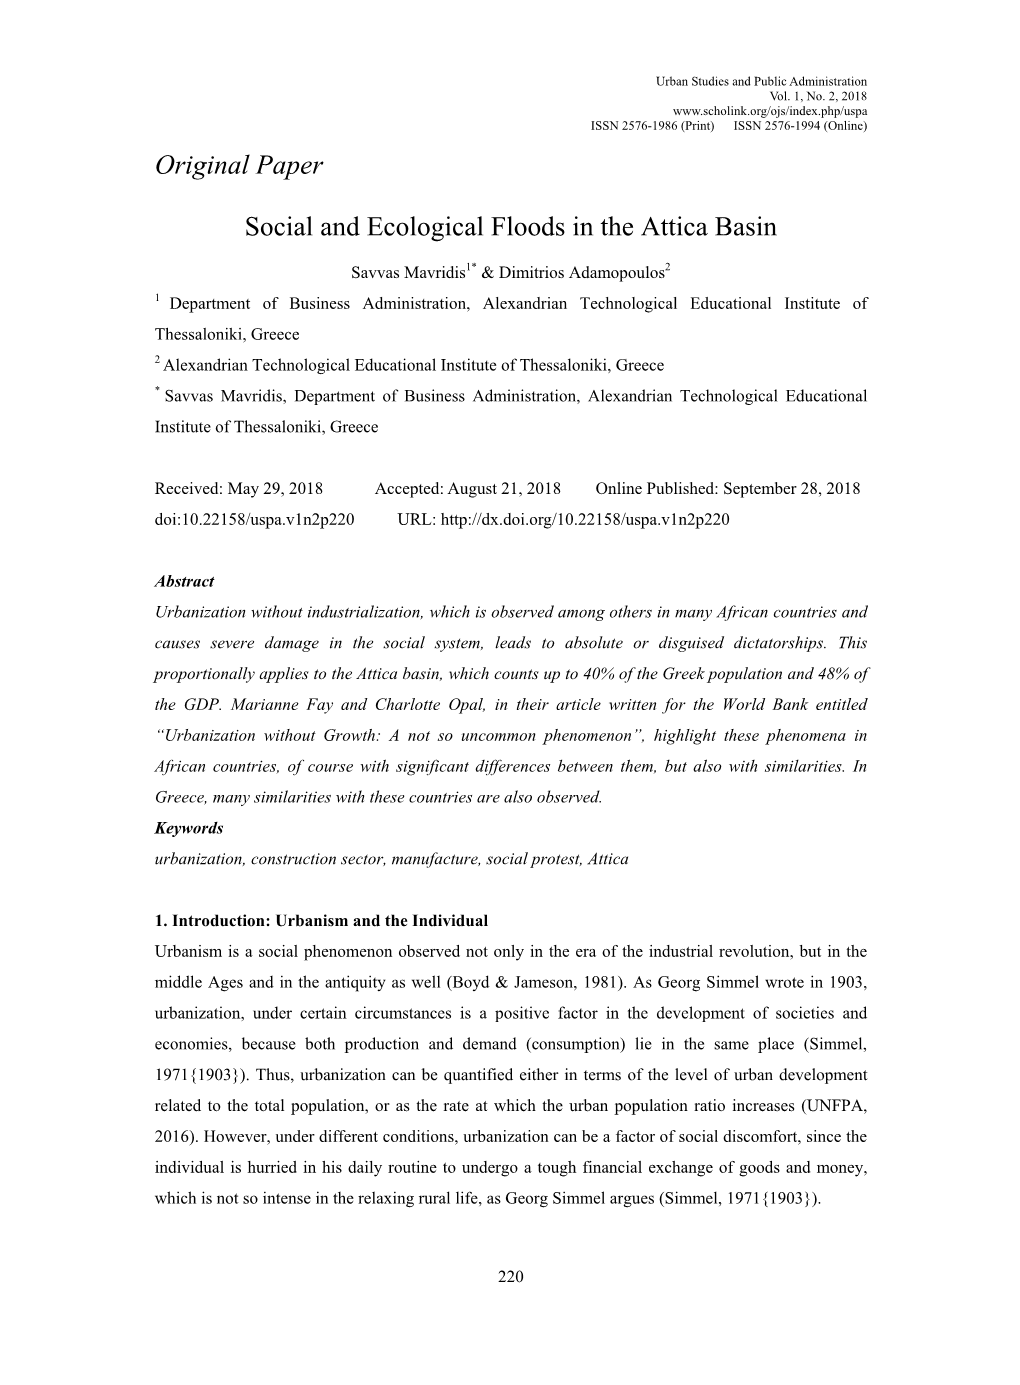 Original Paper Social and Ecological Floods in the Attica Basin